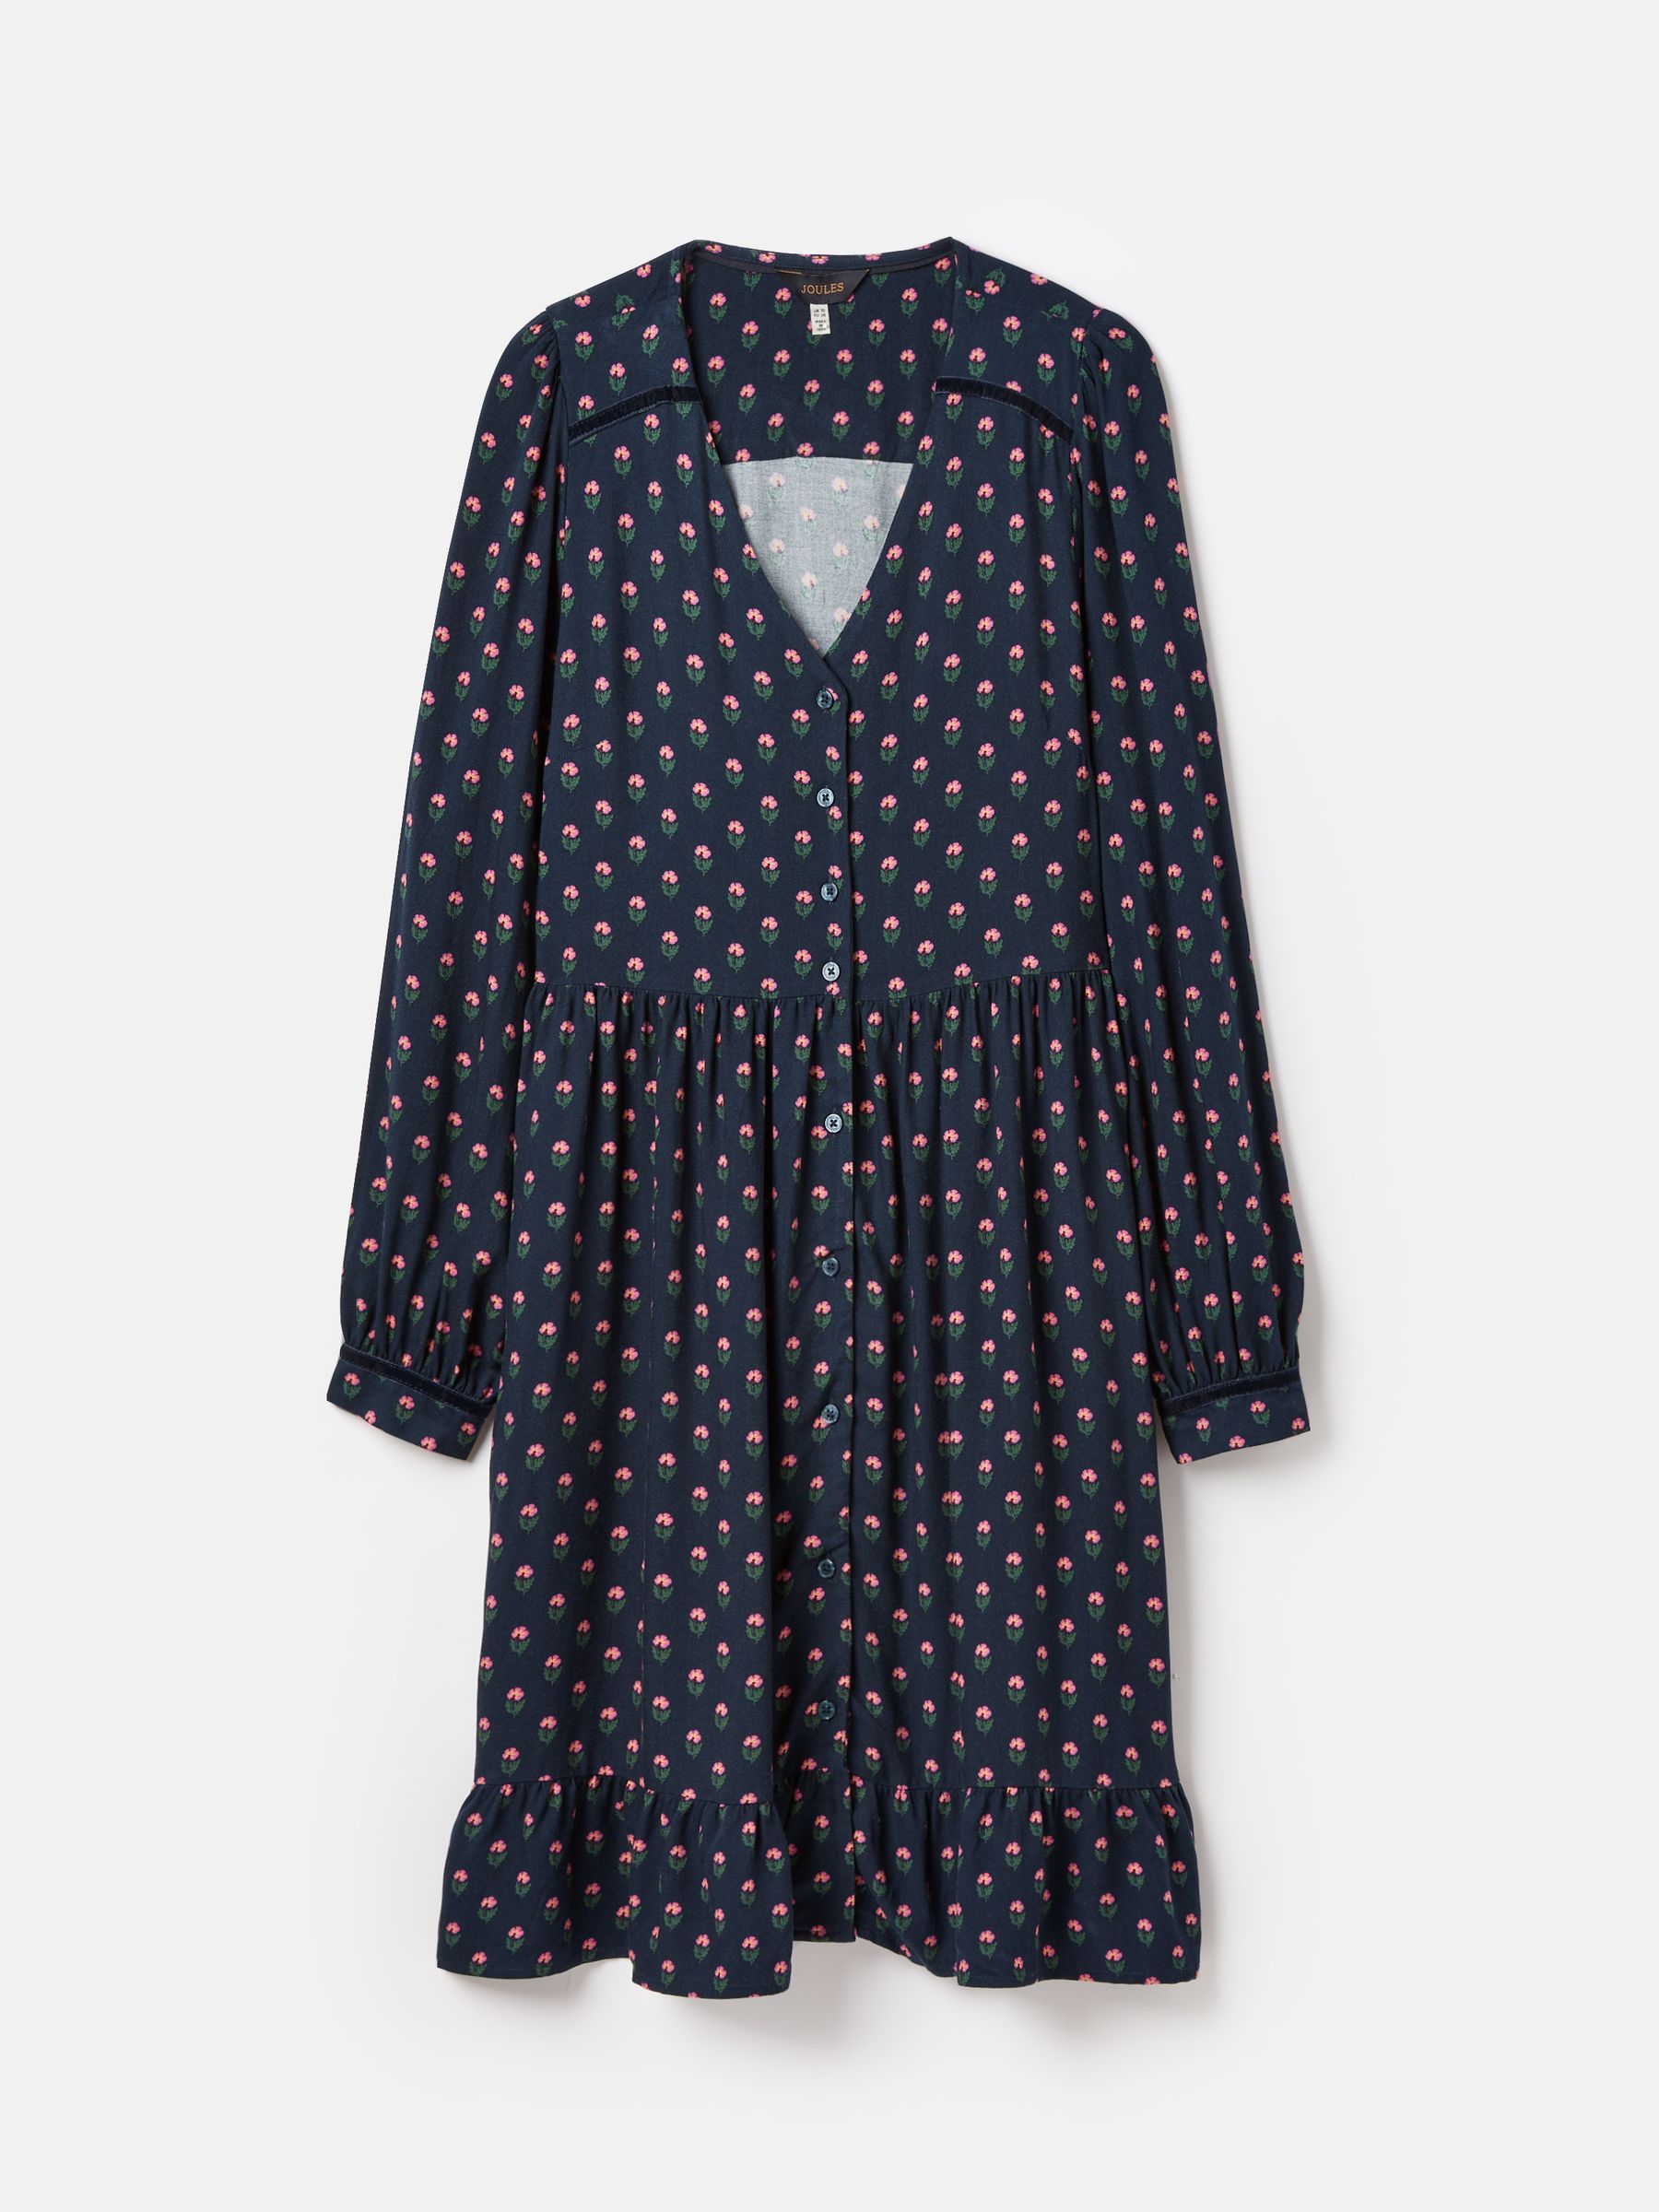 Buy Joules Bonnie Button Down Dress with Peplum Hem from the Joules ...